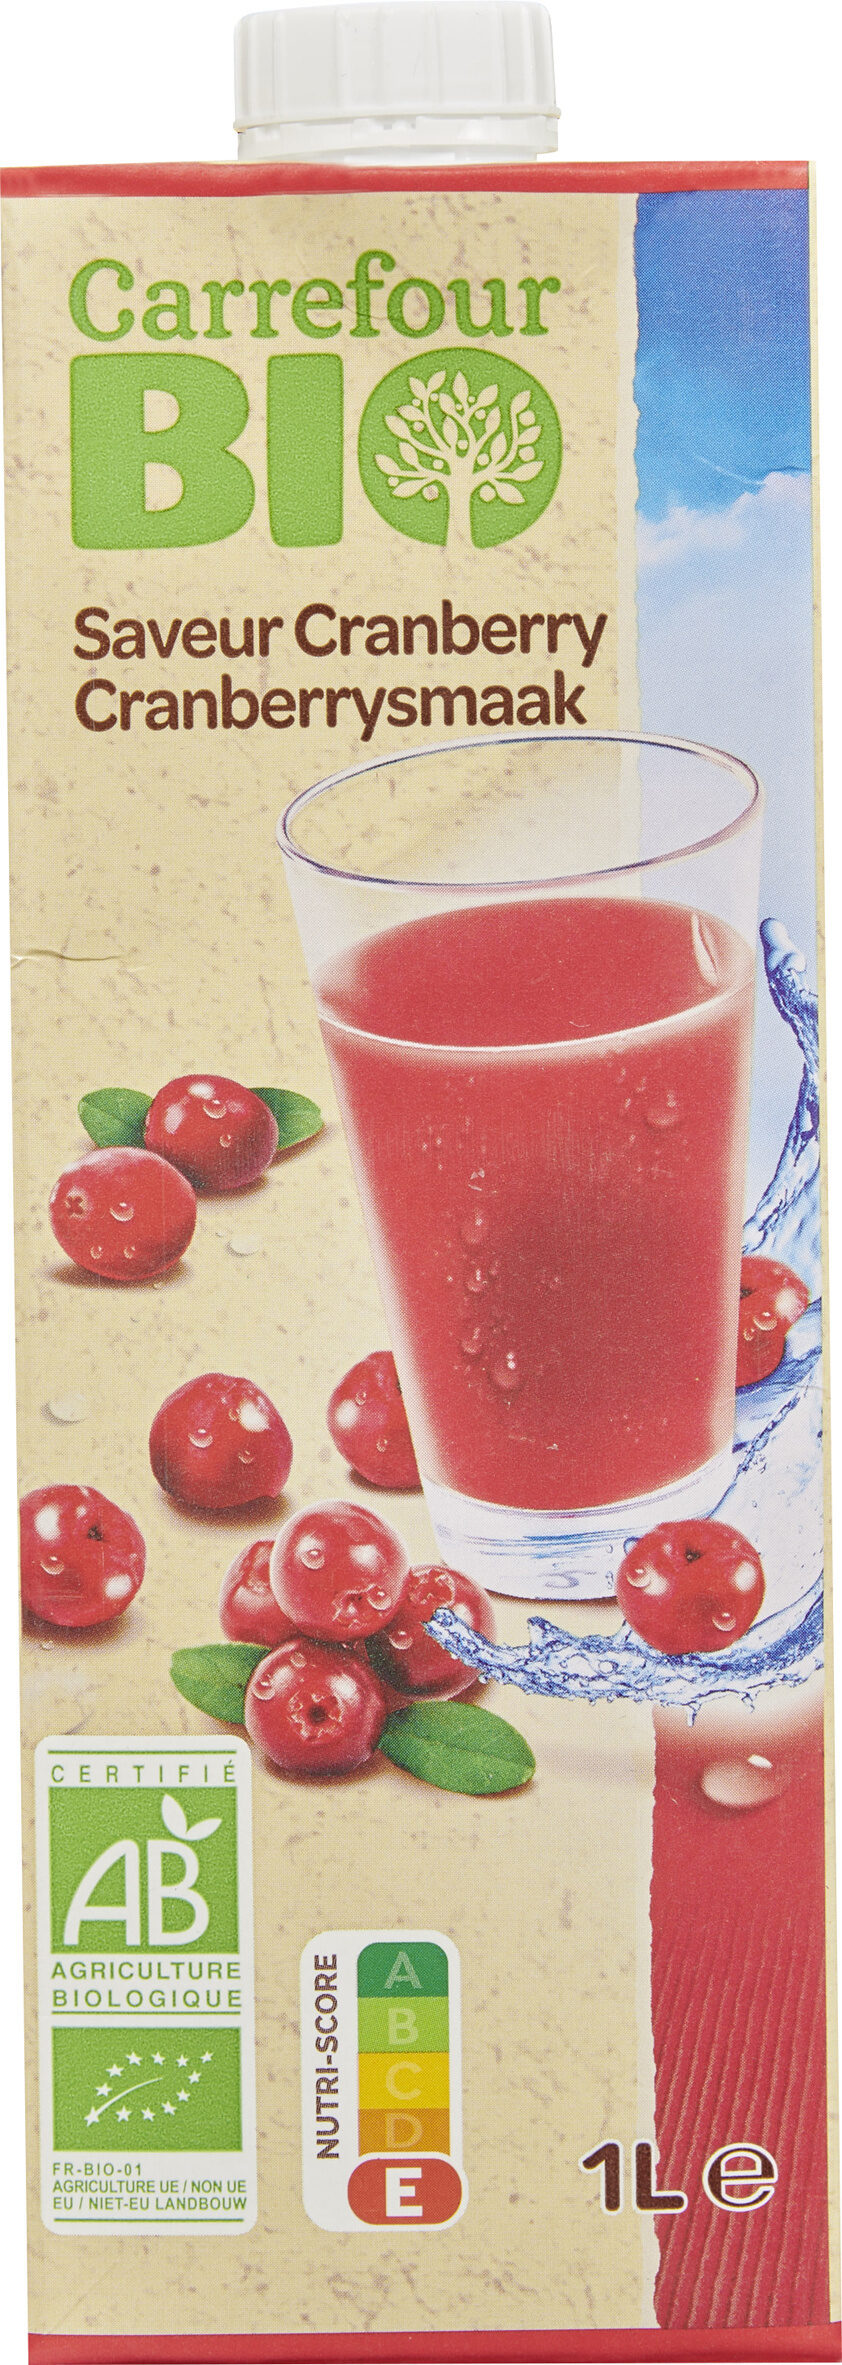 Cranberry - Product - fr